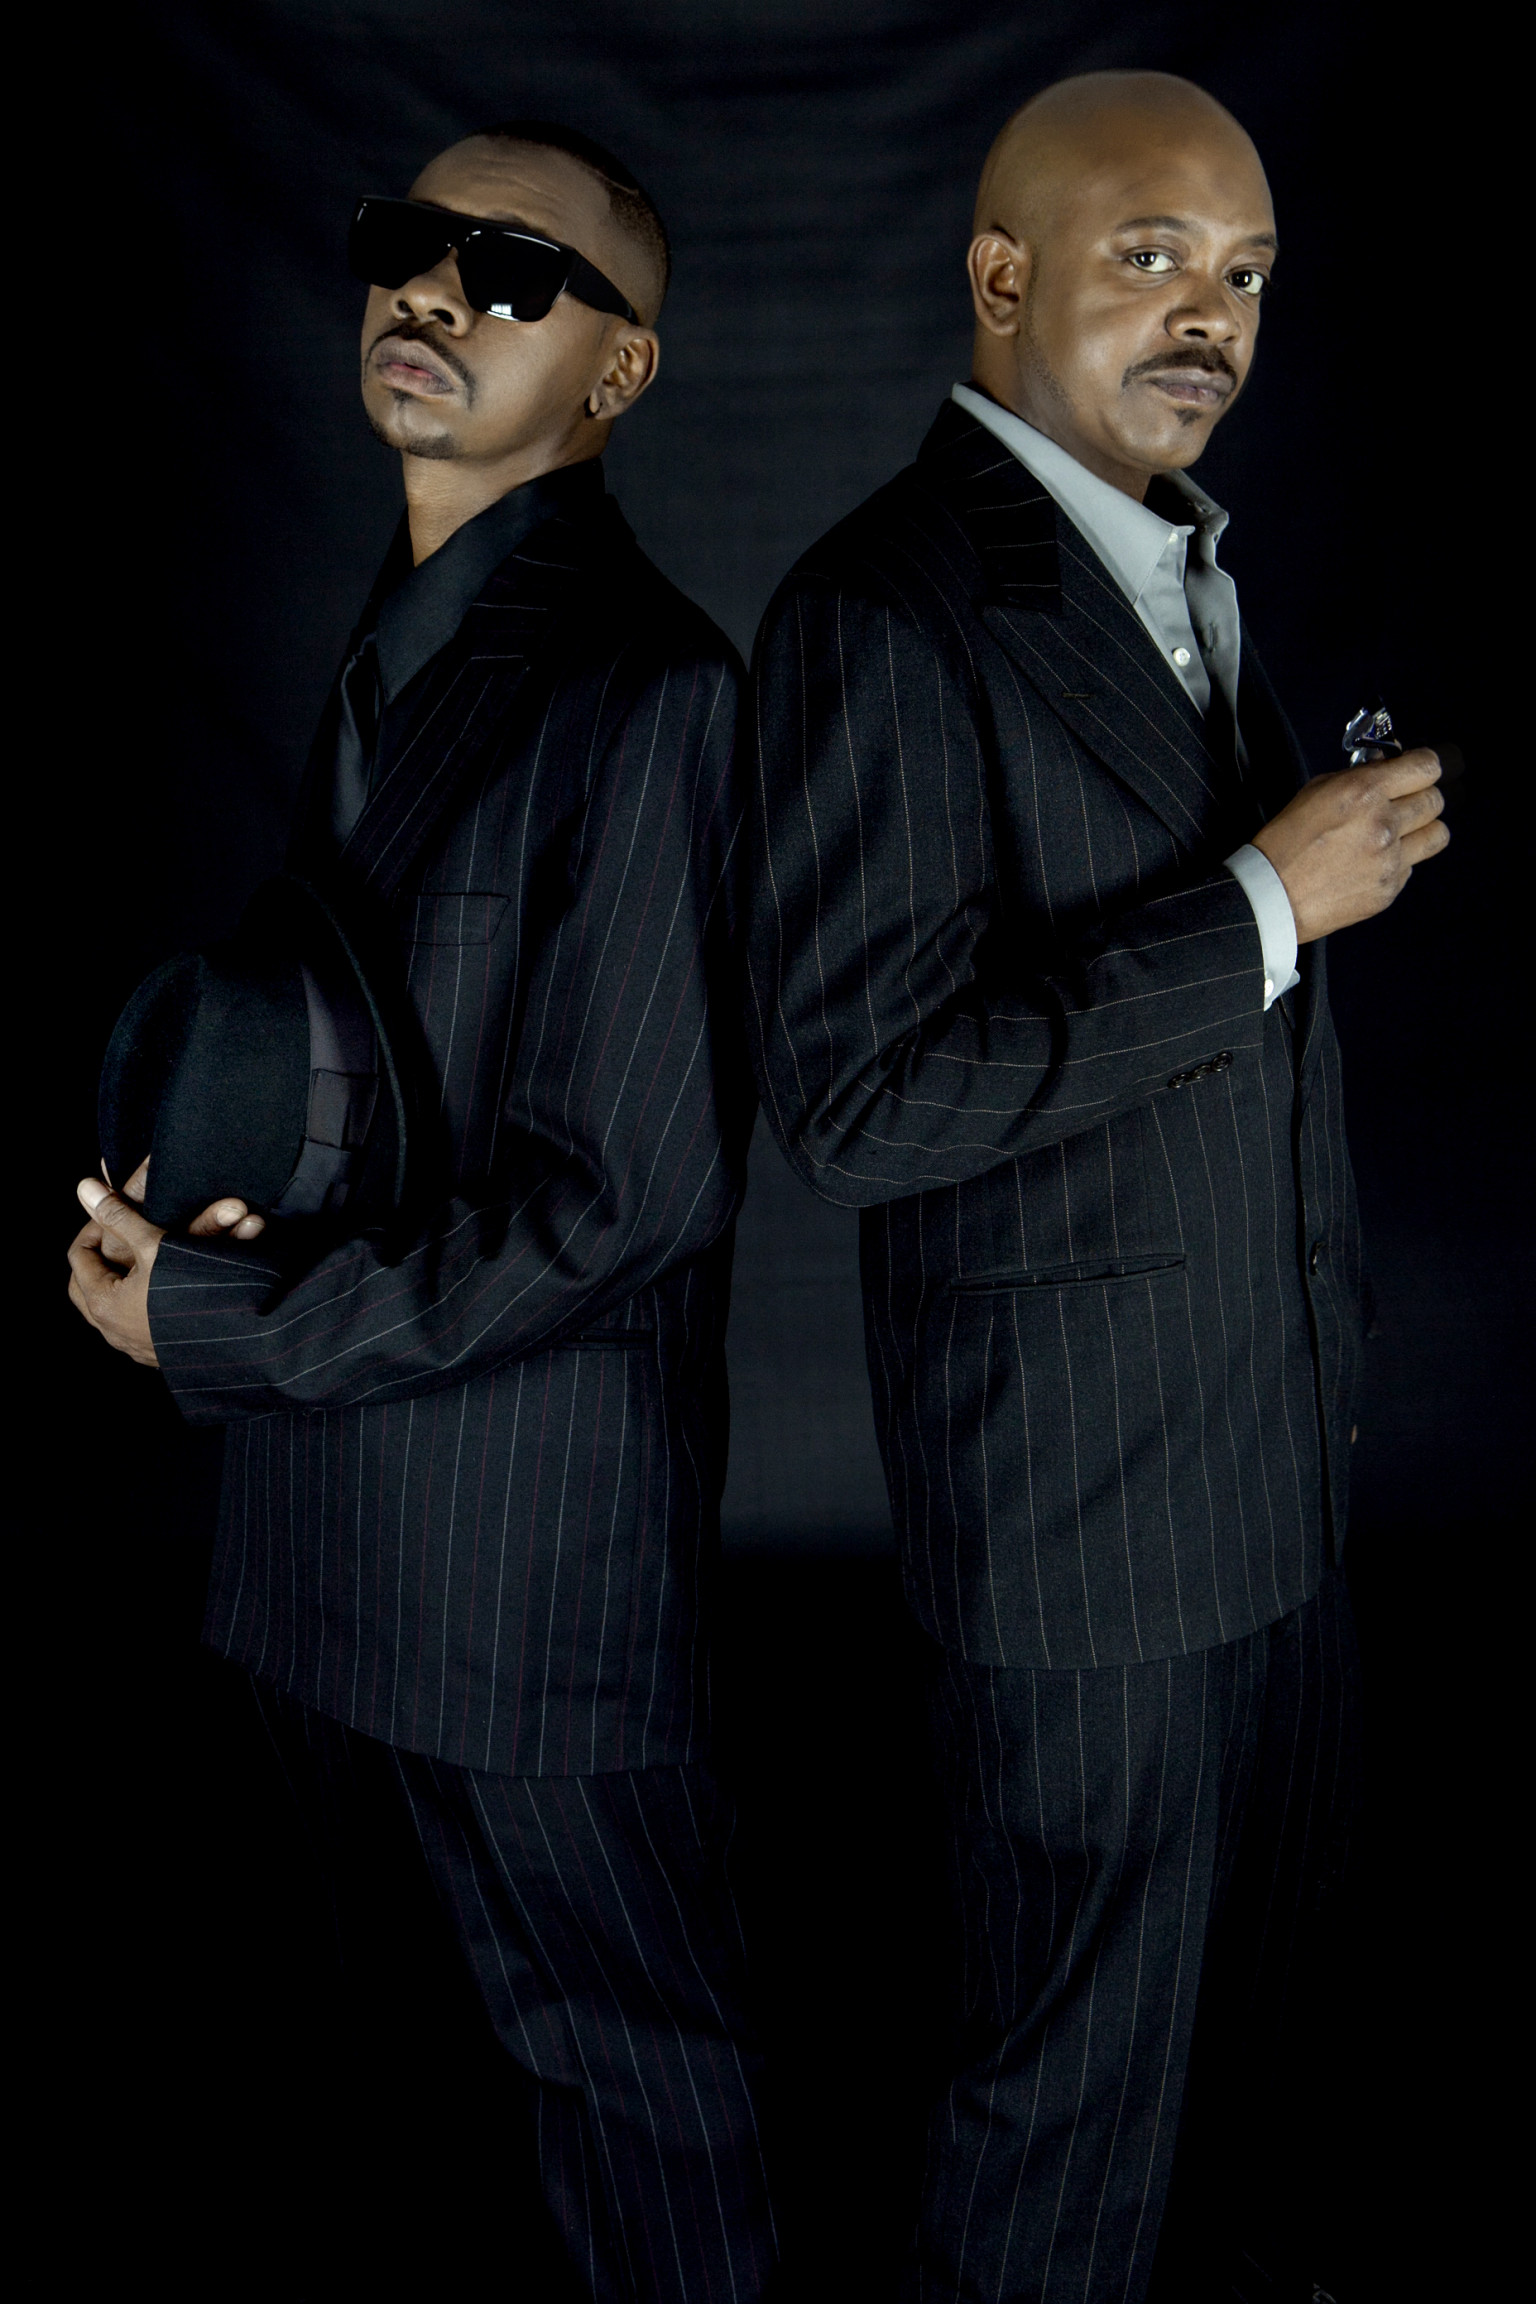 New K-Ci And JoJo Album: One Half Of Dynamic Duo Reveals Details Of 'My Brother's Keeper' And ...